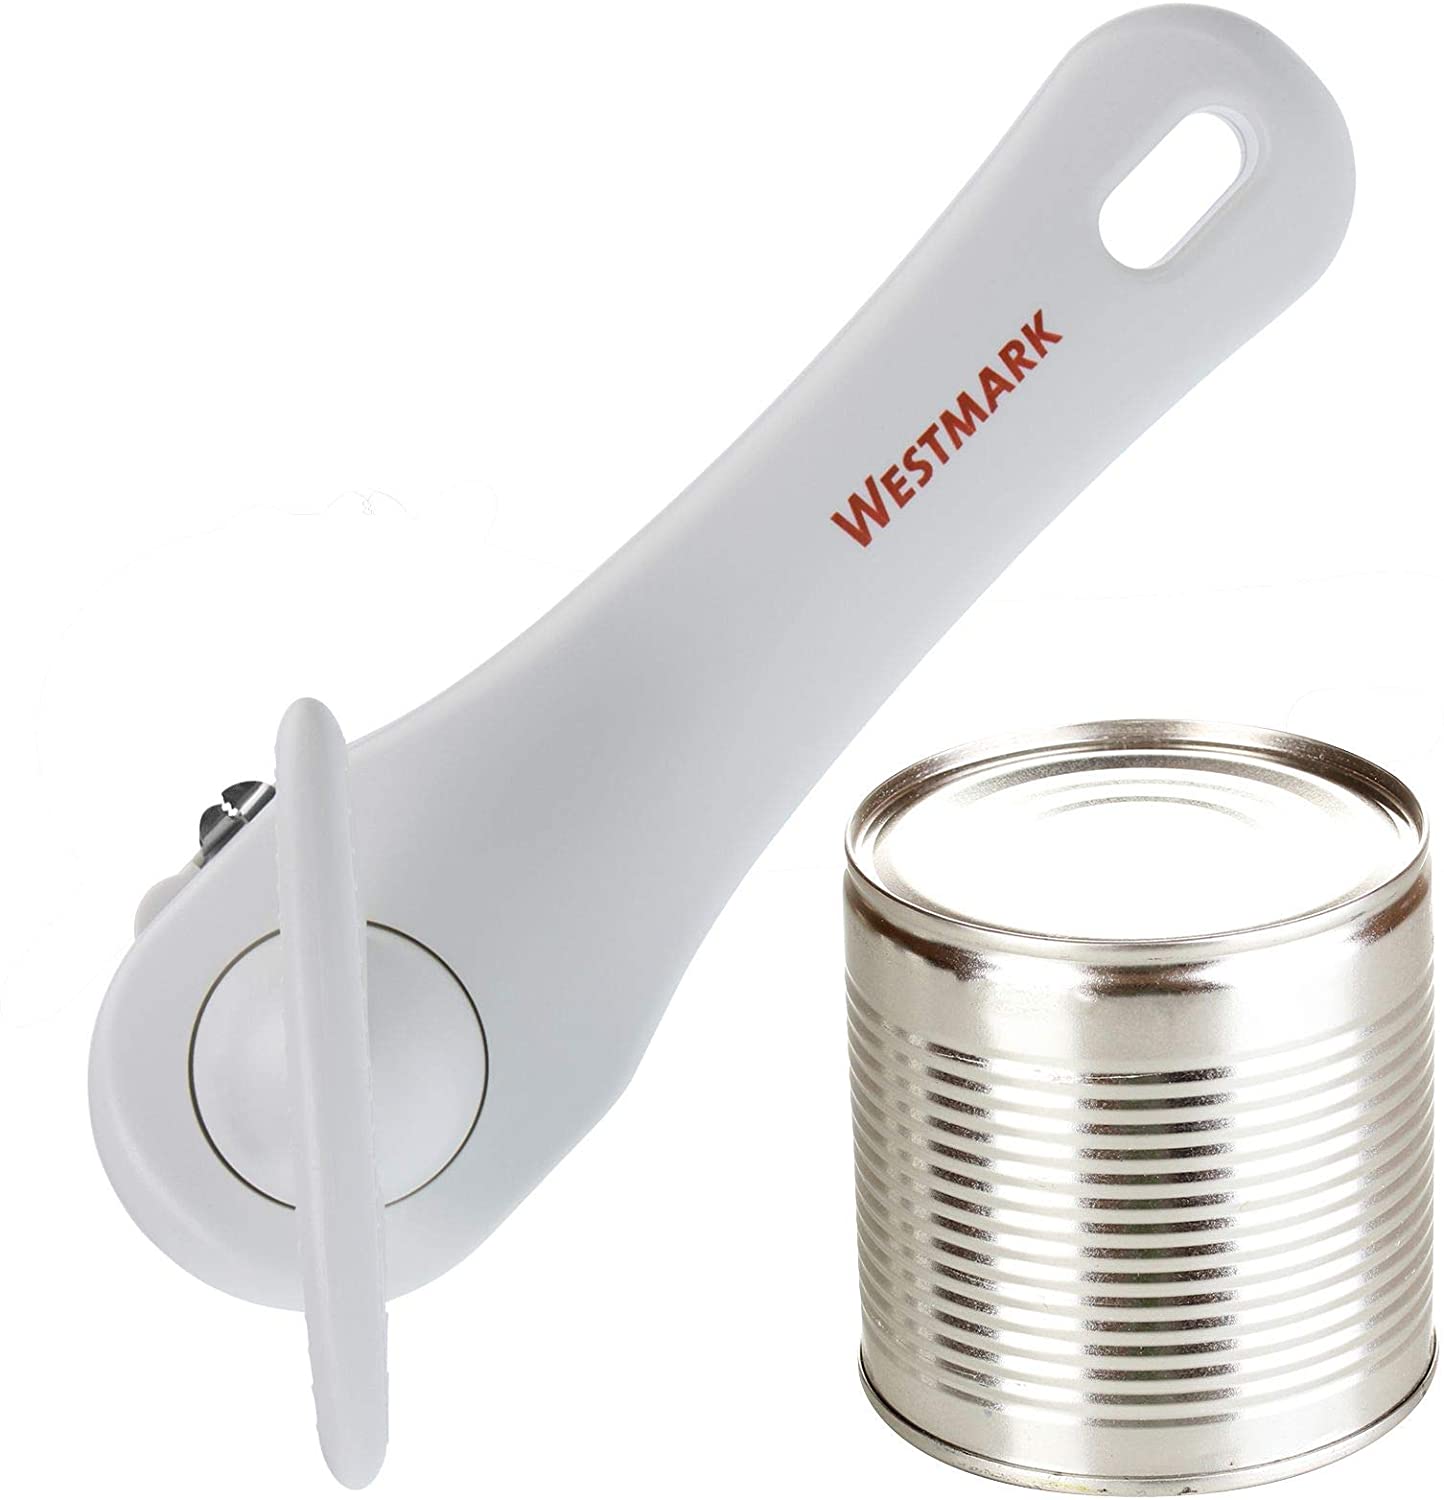 1033 2260 safety can opener Klu